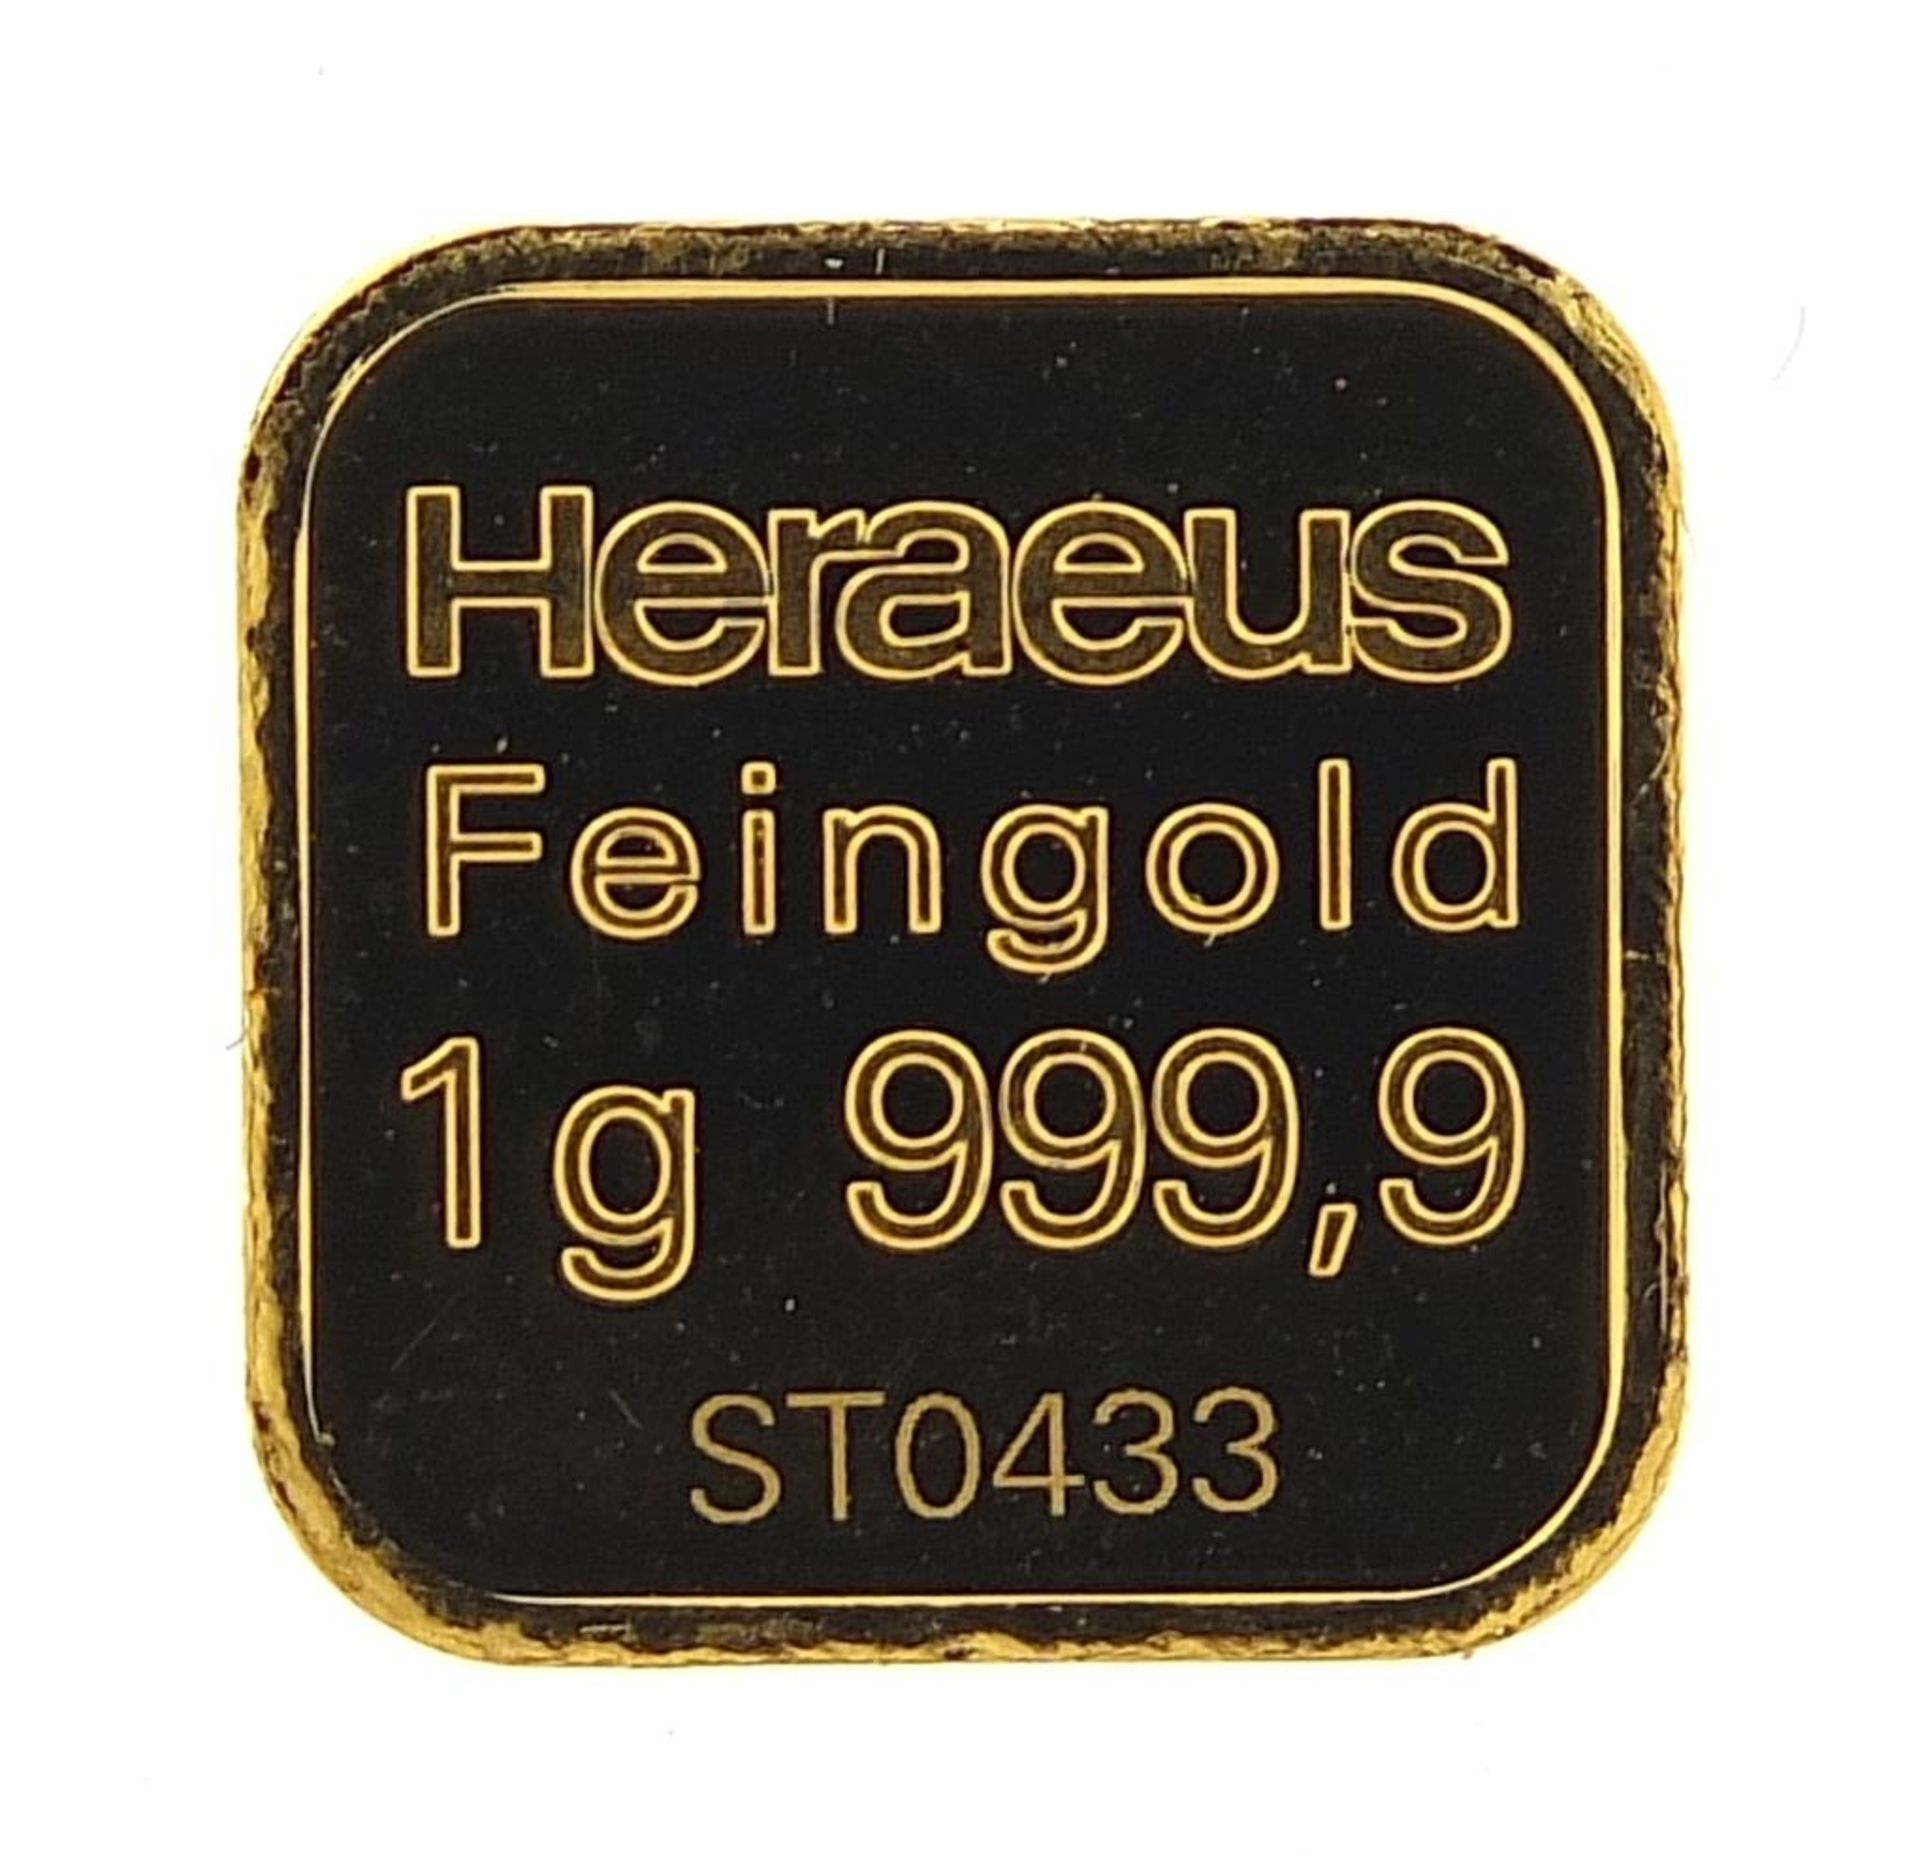 Heraeus 999.9 fine gold ingot - this lot is sold without buyer?s premium - Image 2 of 2